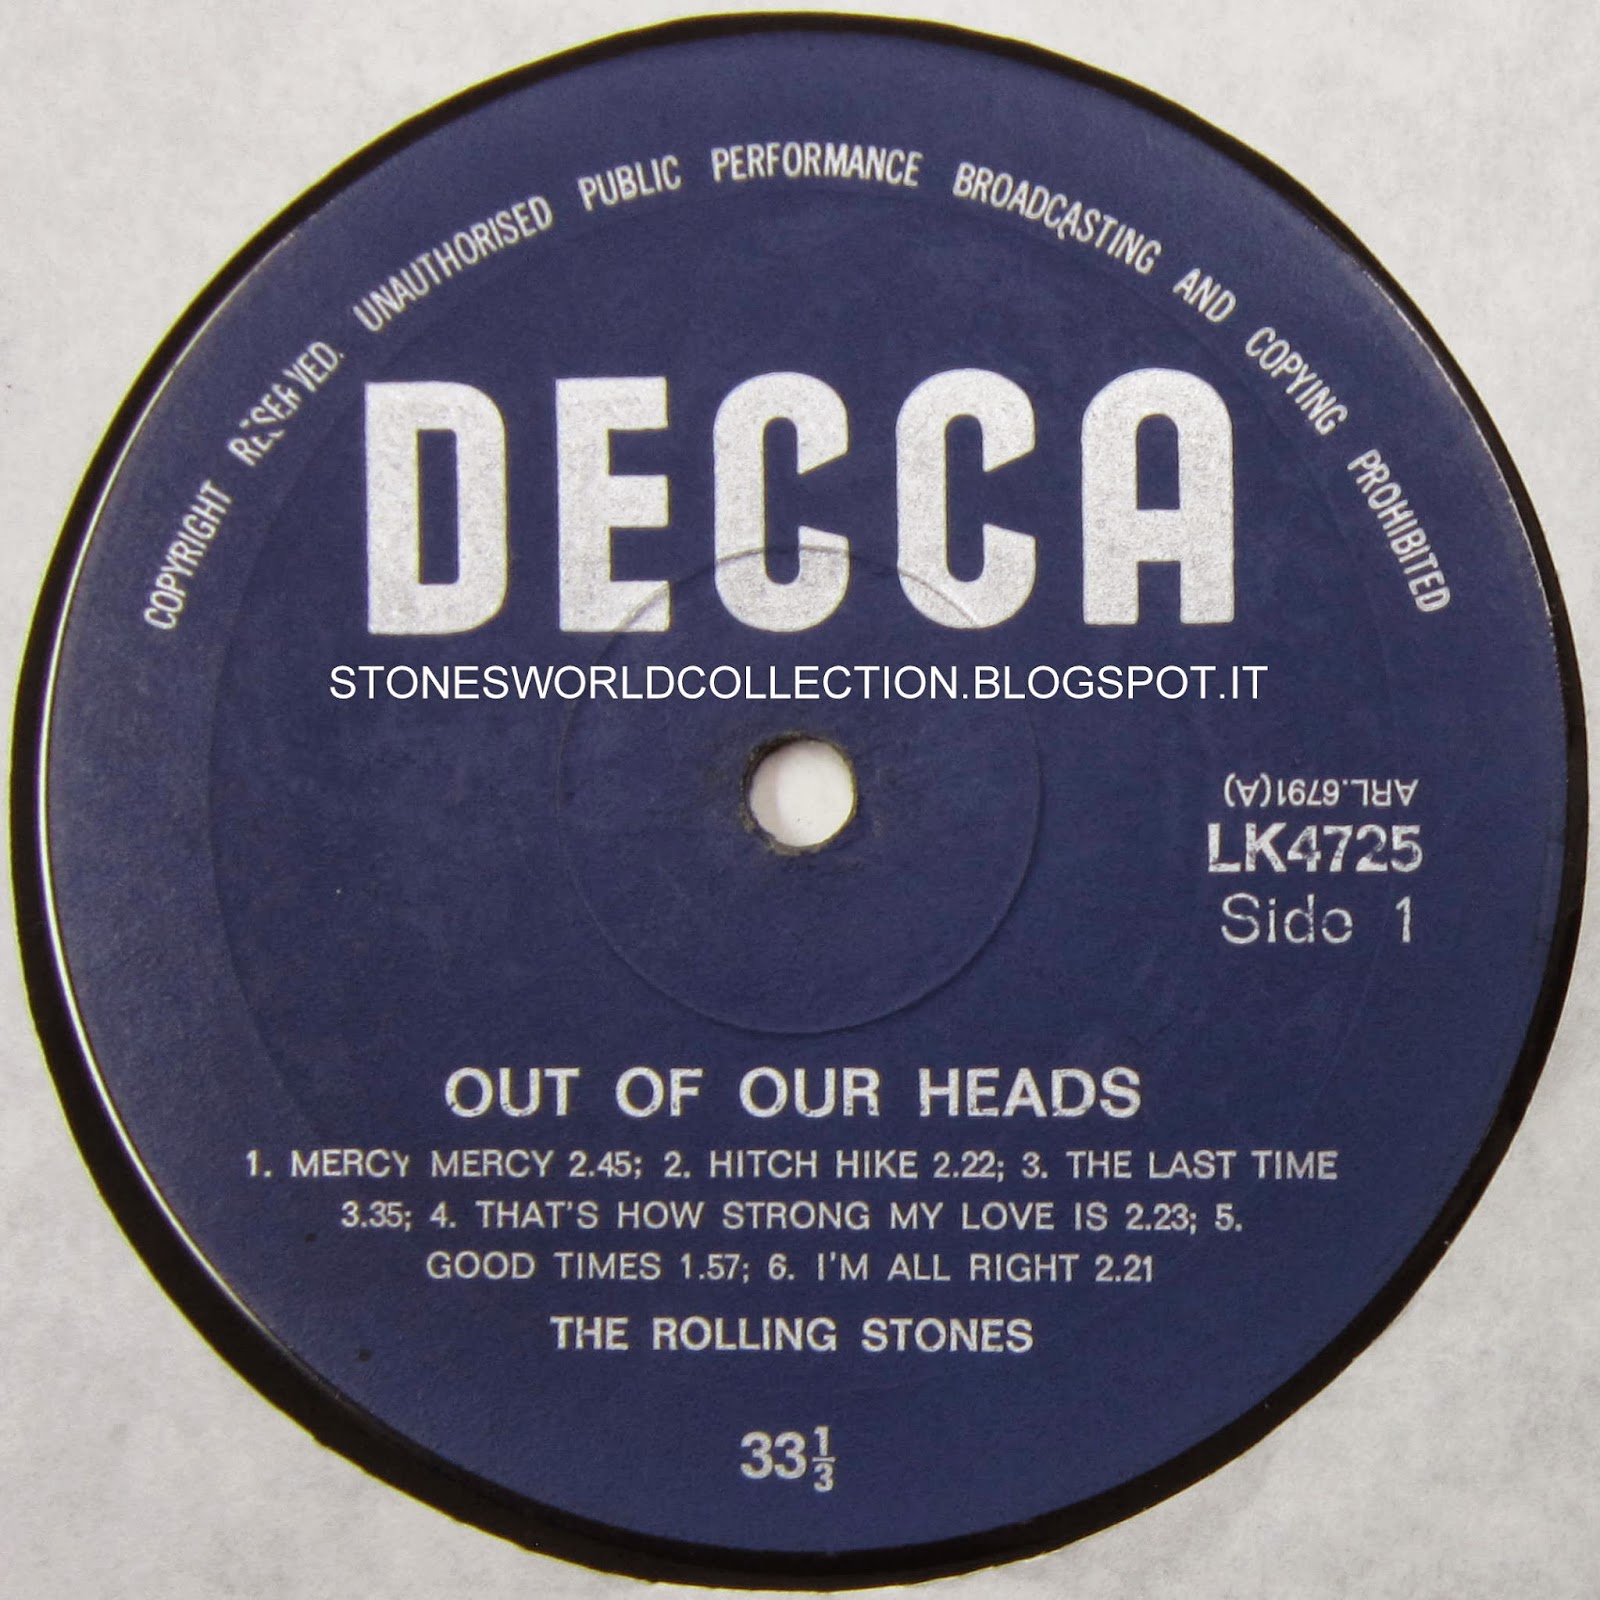 Out of Our Heads - Wikipedia